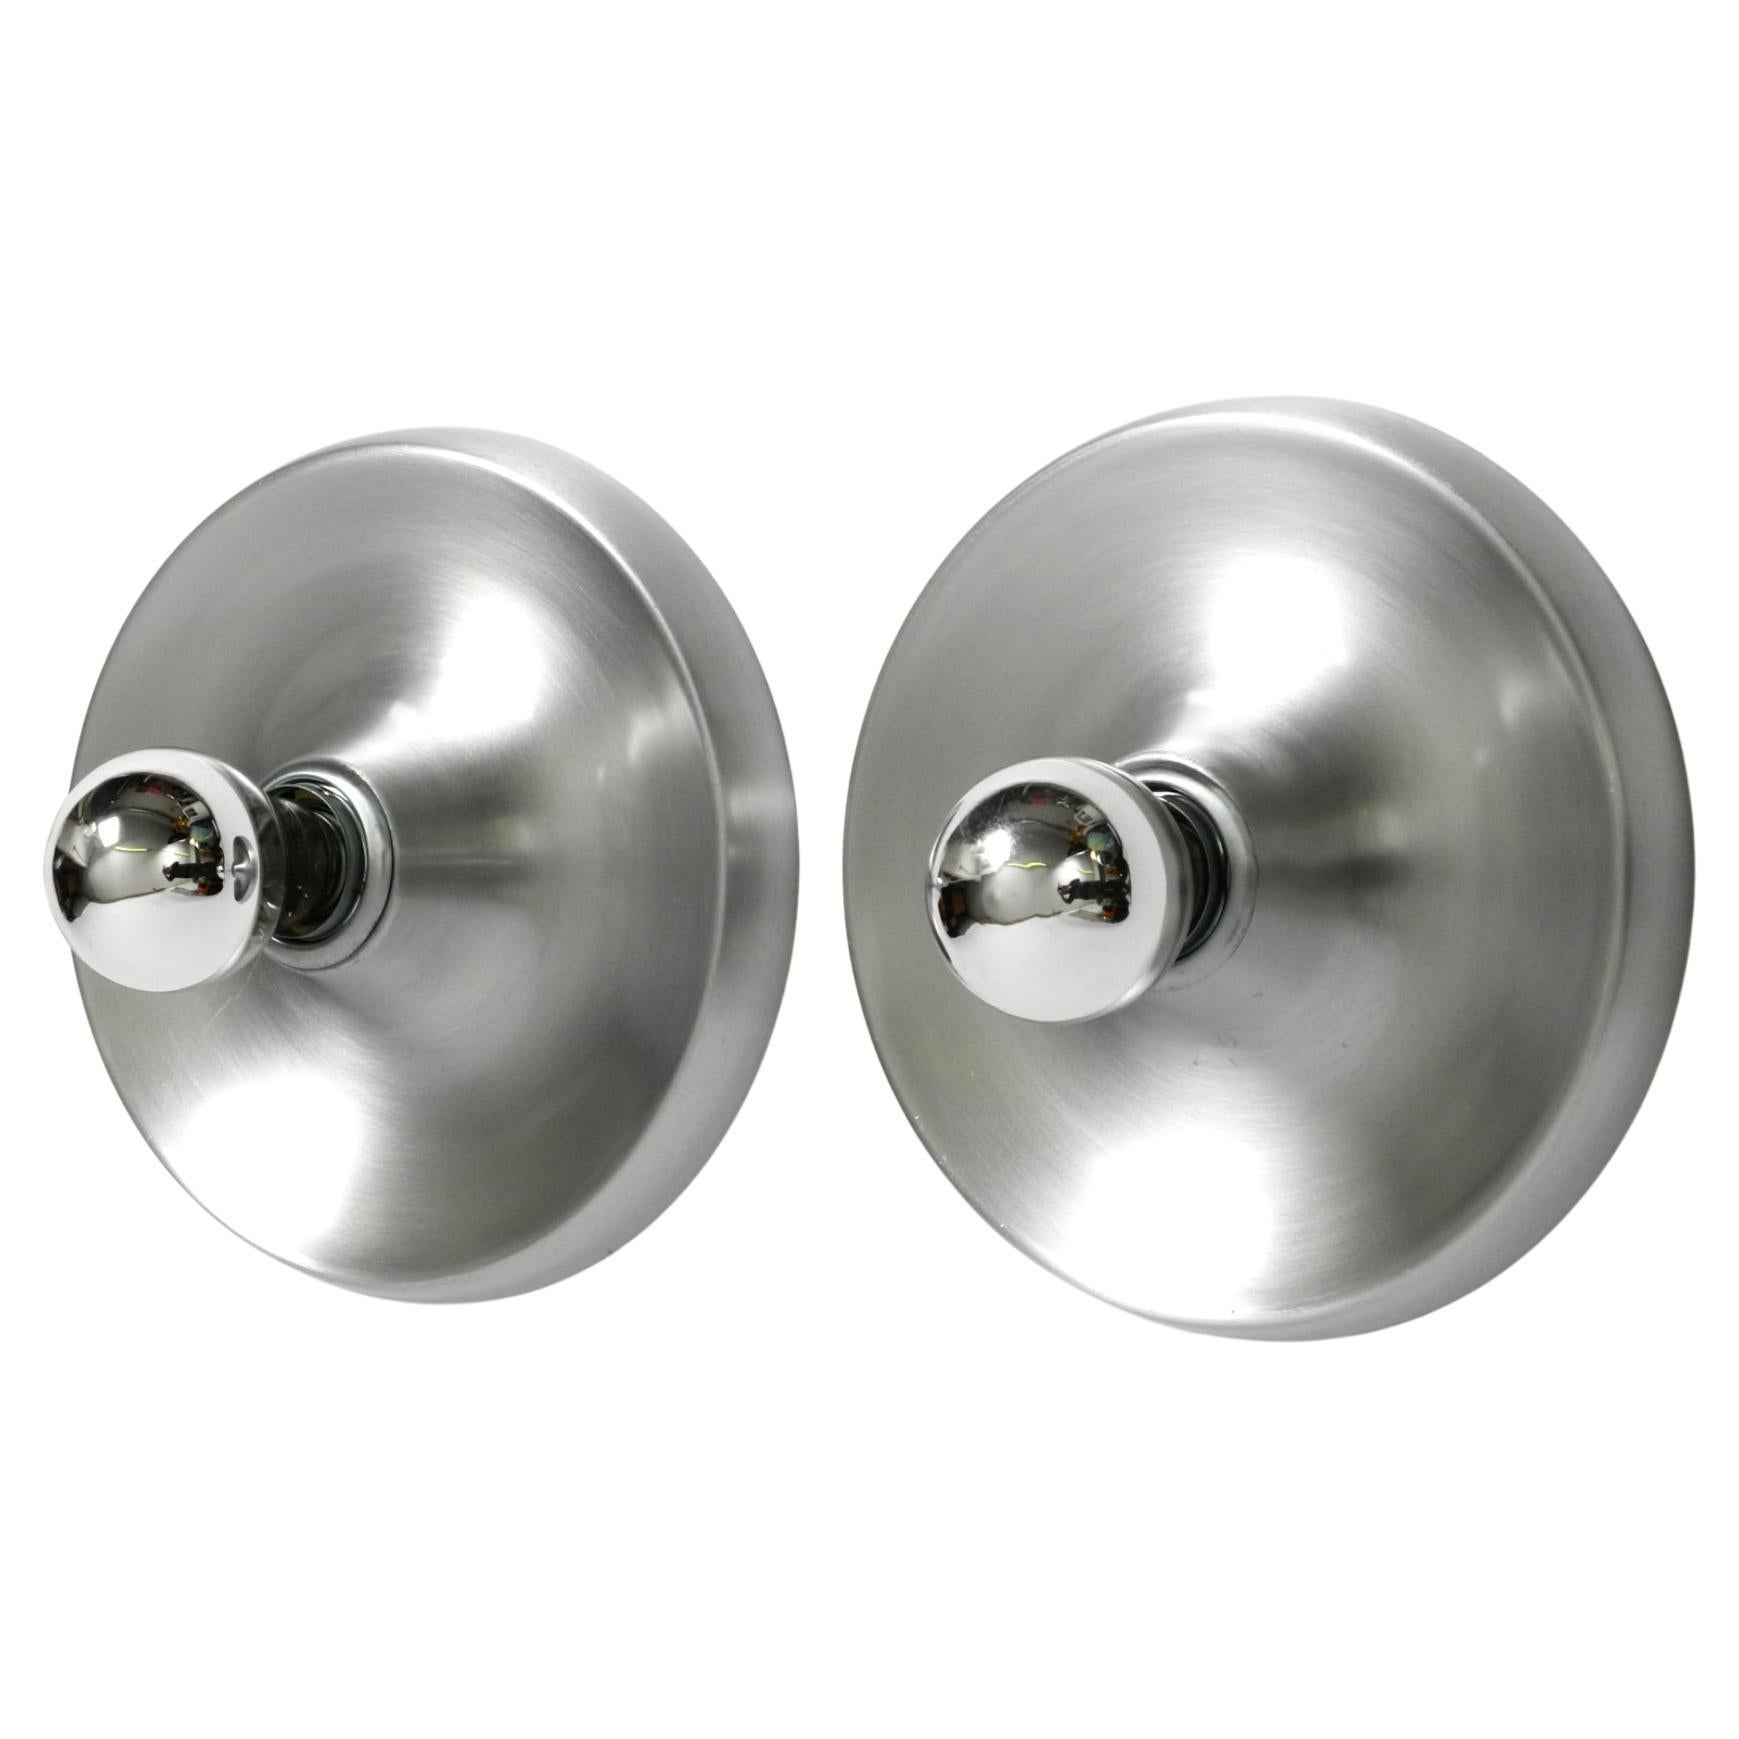 Two 1960s round Space Age Pop Art aluminum ceiling or wall lamps